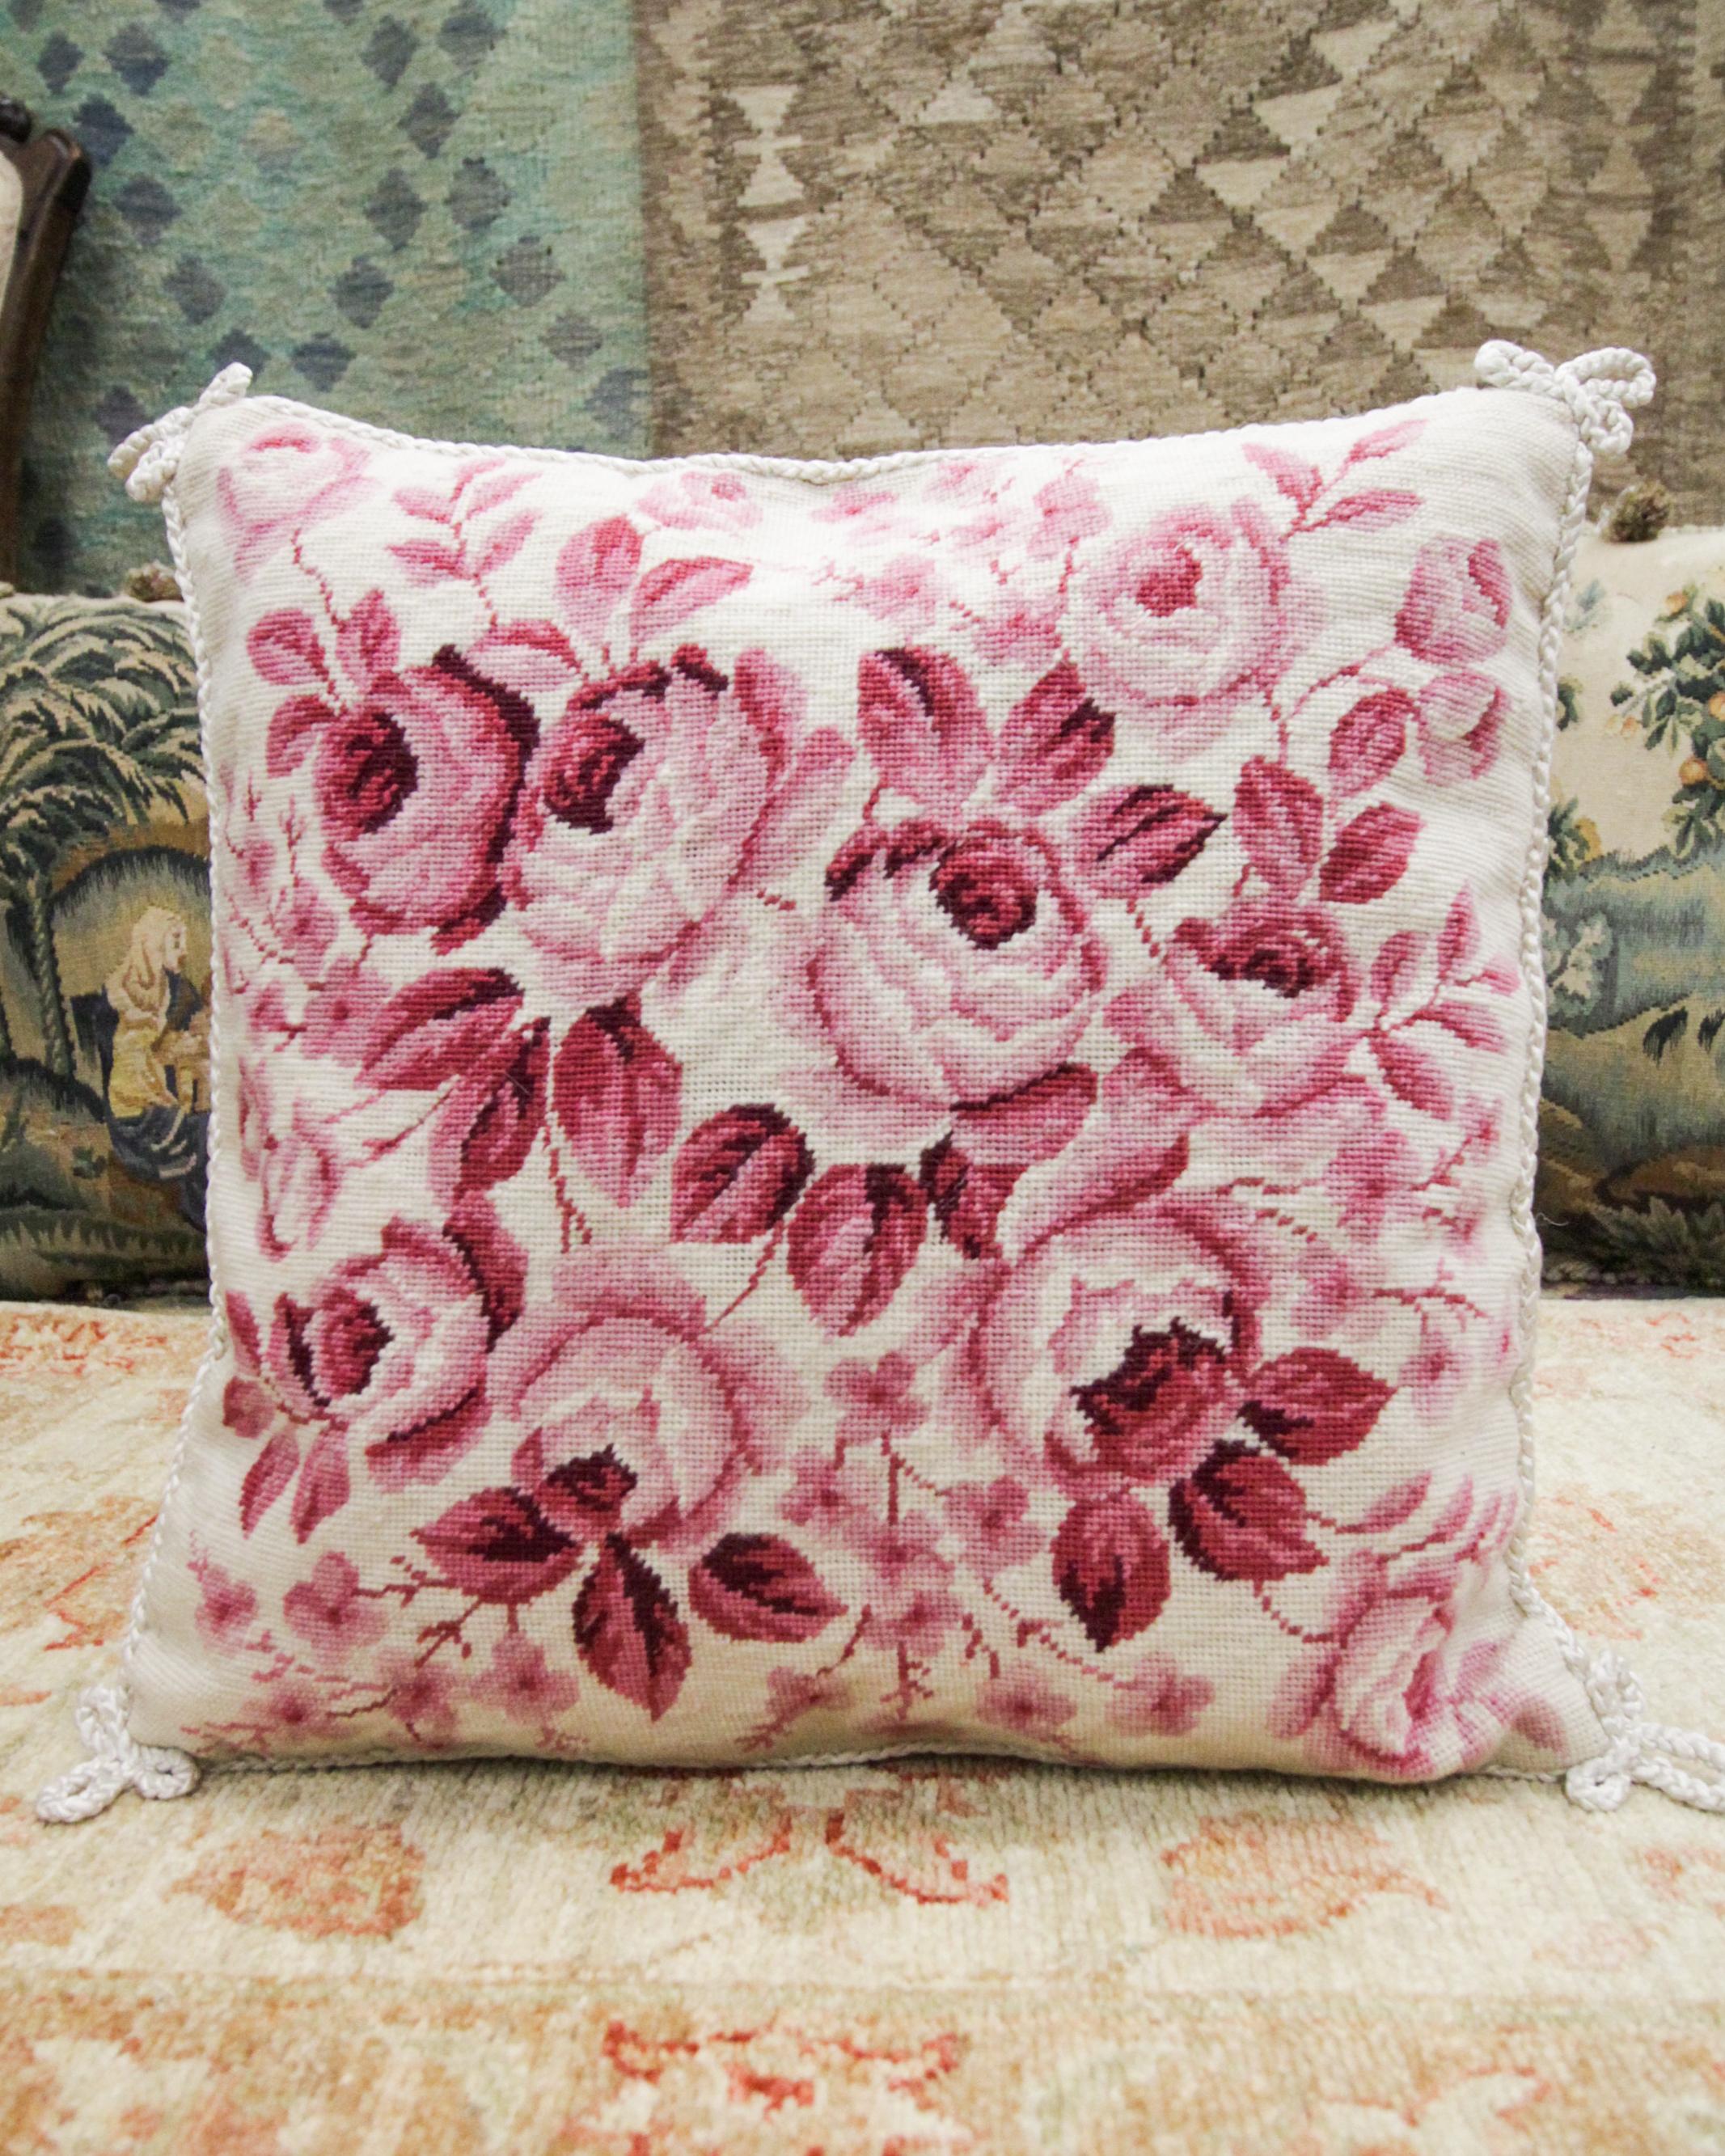 This floral needlepoint cushion cover is an excellent example of vintage cushion covers woven in the 1990s. The floral pattern has been woven in rich pink tones on a subtle cream background, detailed with a rope edge and corner design. The colour